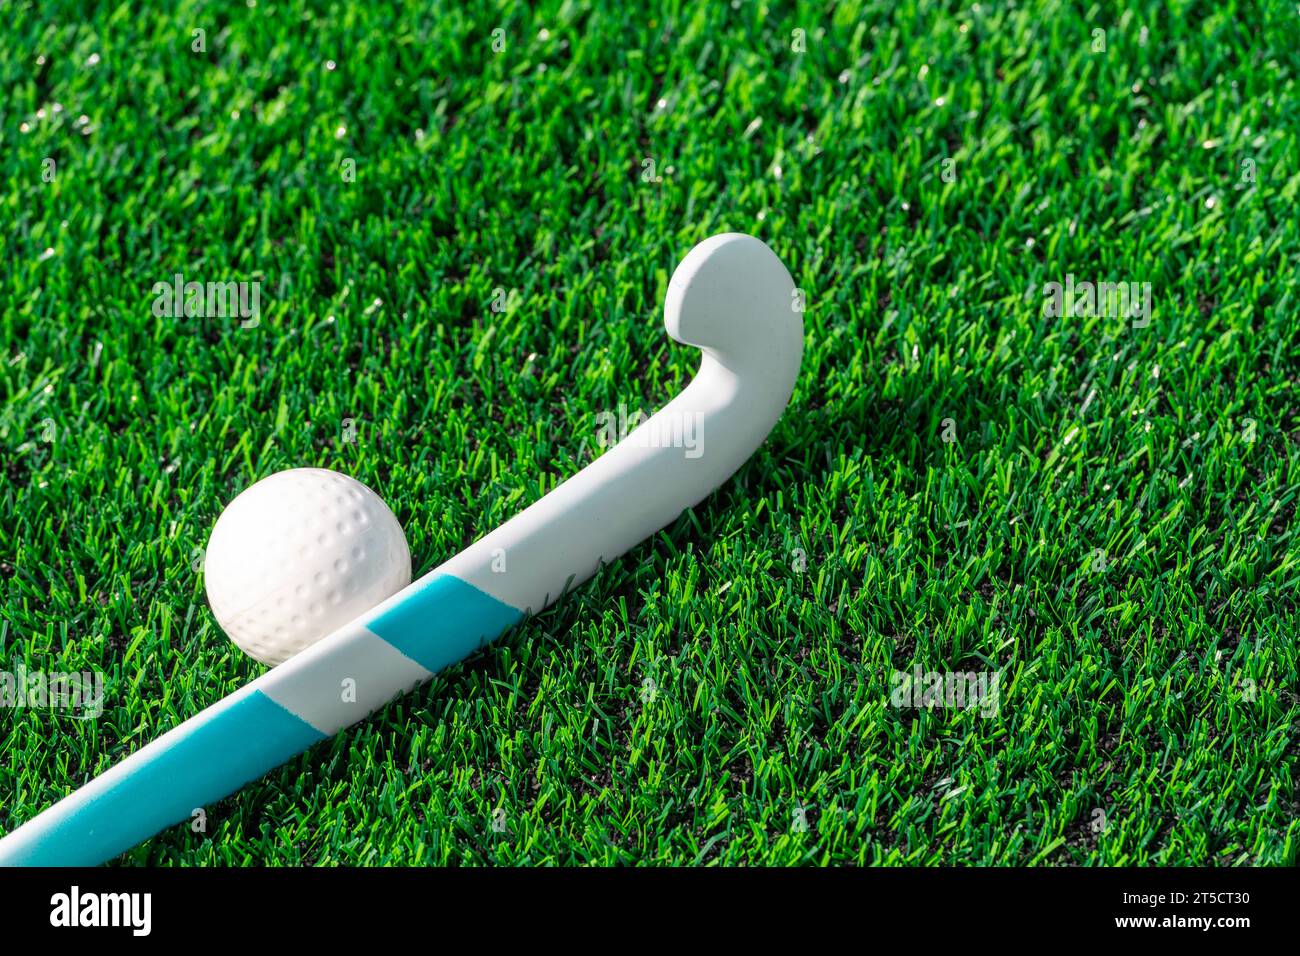 Field hockey stick and ball on green grass. Team sport concept. Horizontal sport theme poster, greeting cards, headers, website and app Stock Photo